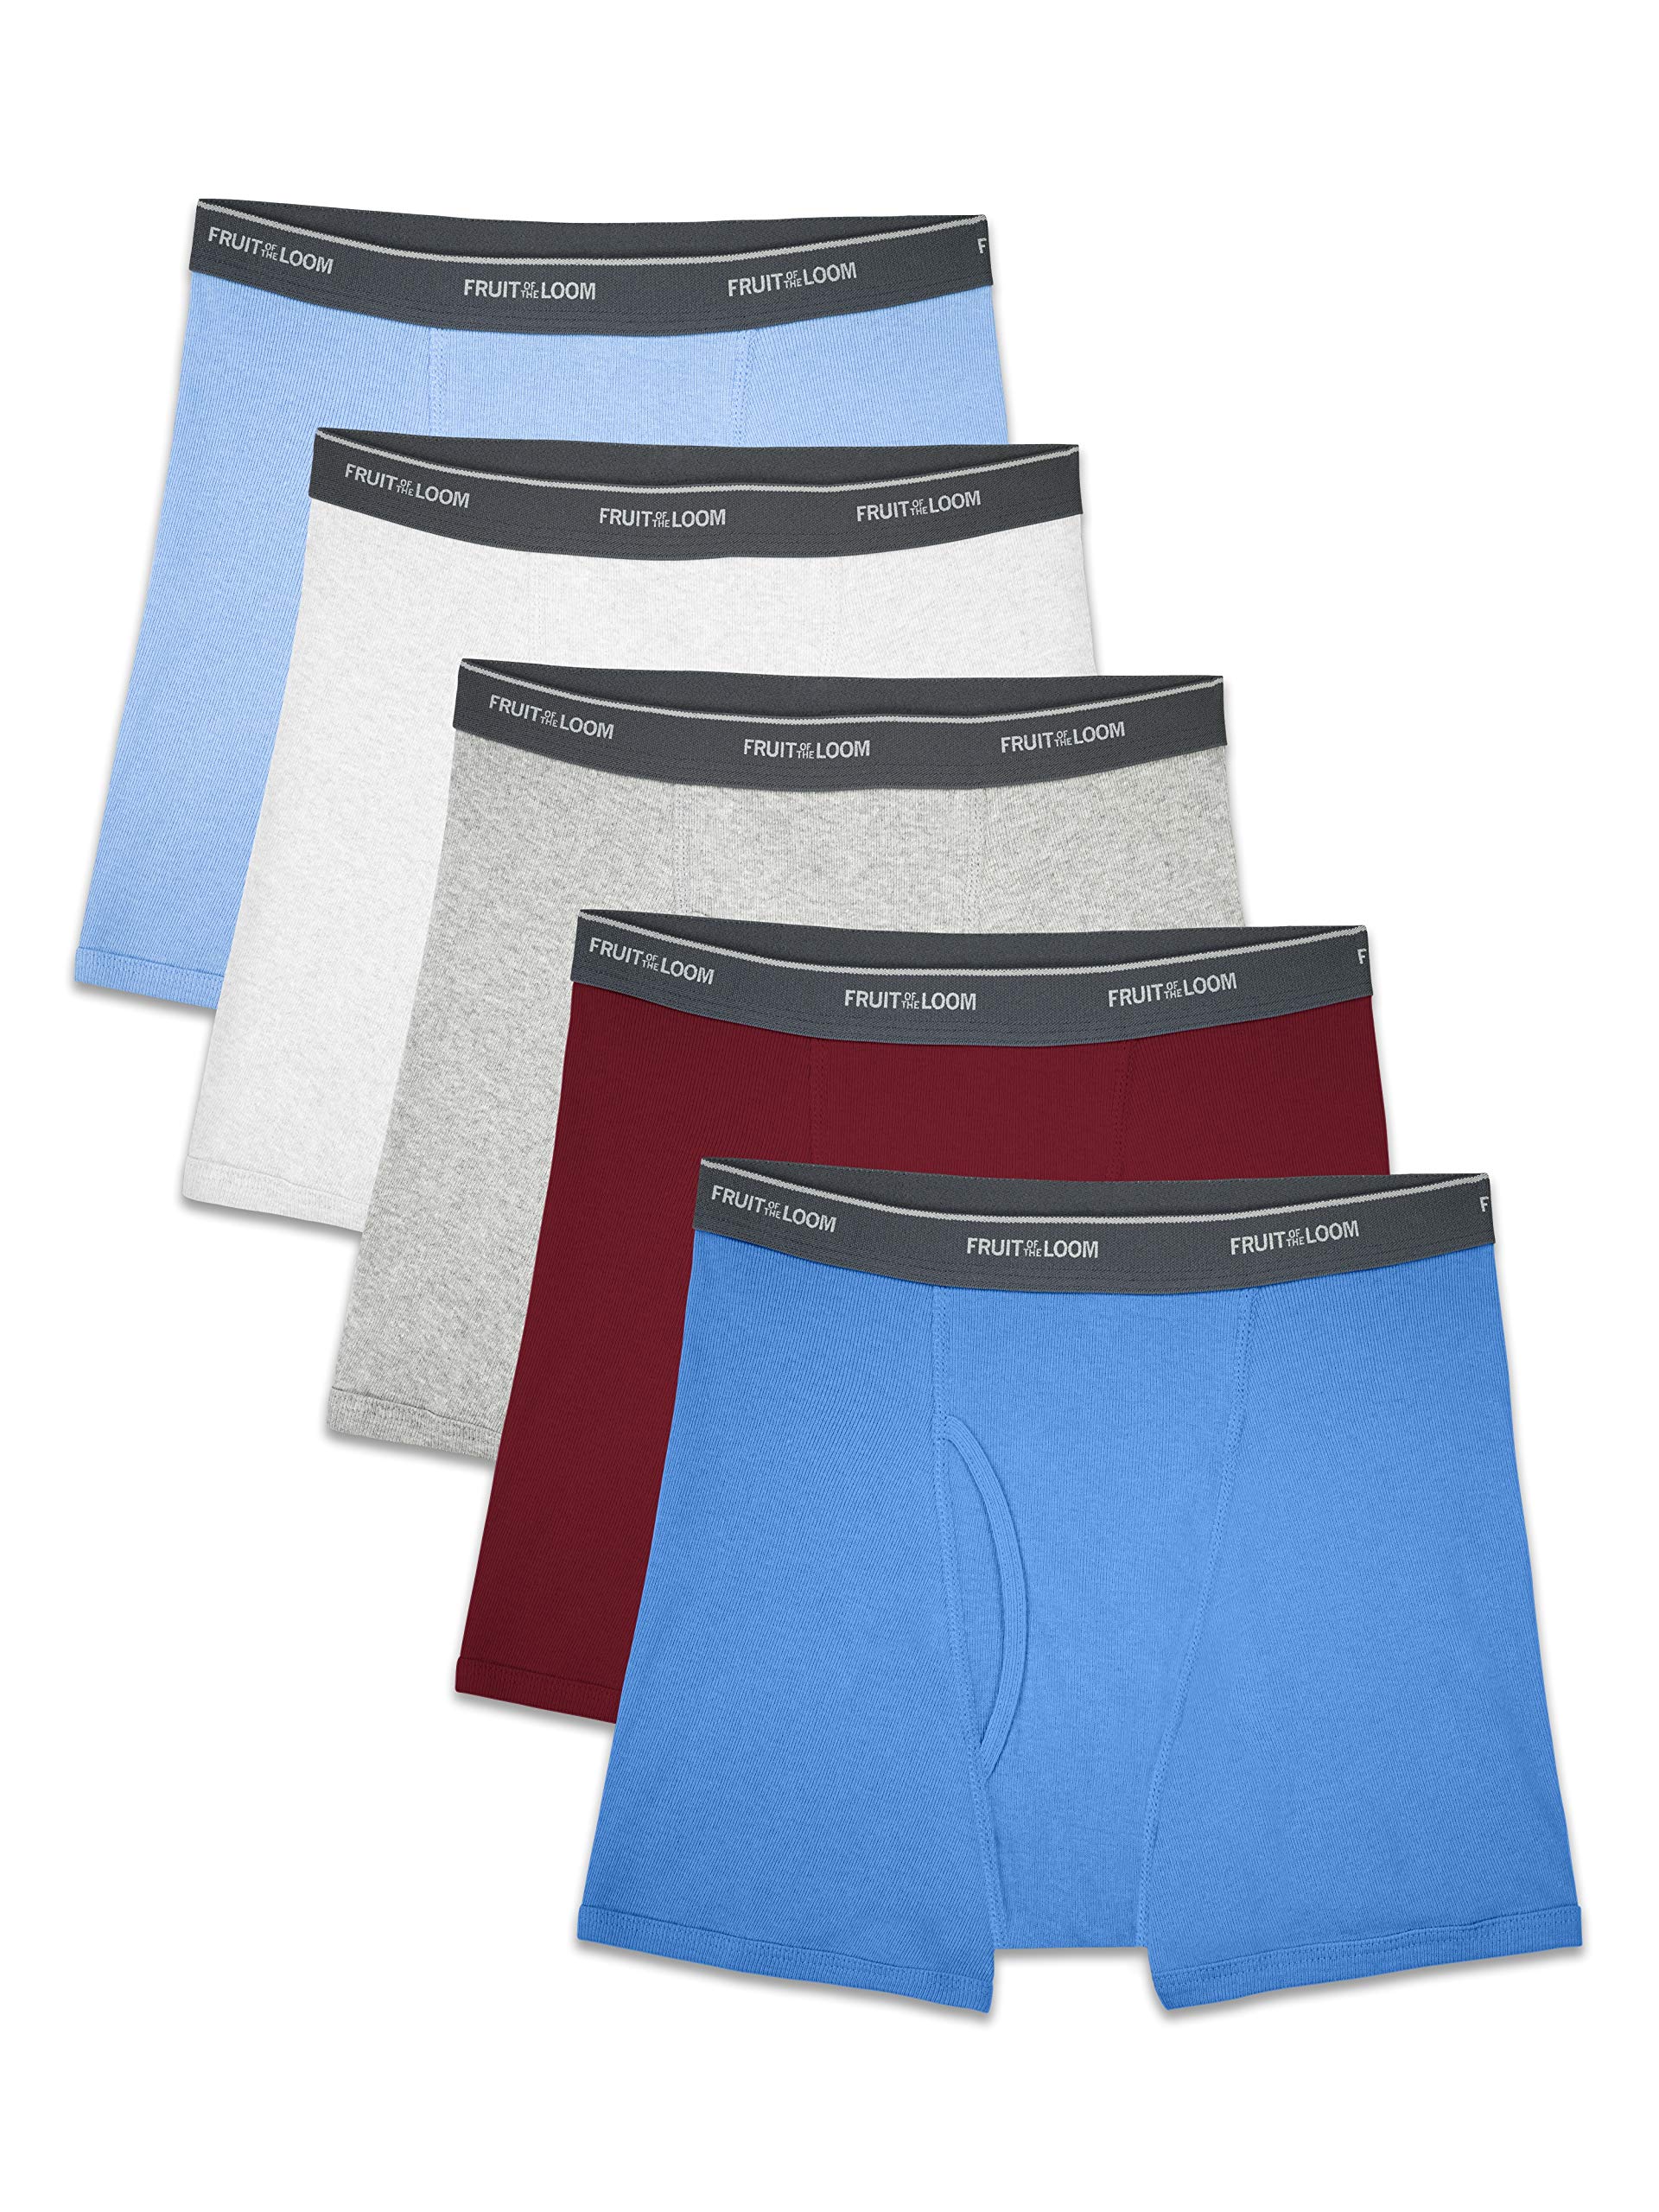 Fruit of the Loom Boys' 5 Pack Assorted Print Boxer Briefs $5.6